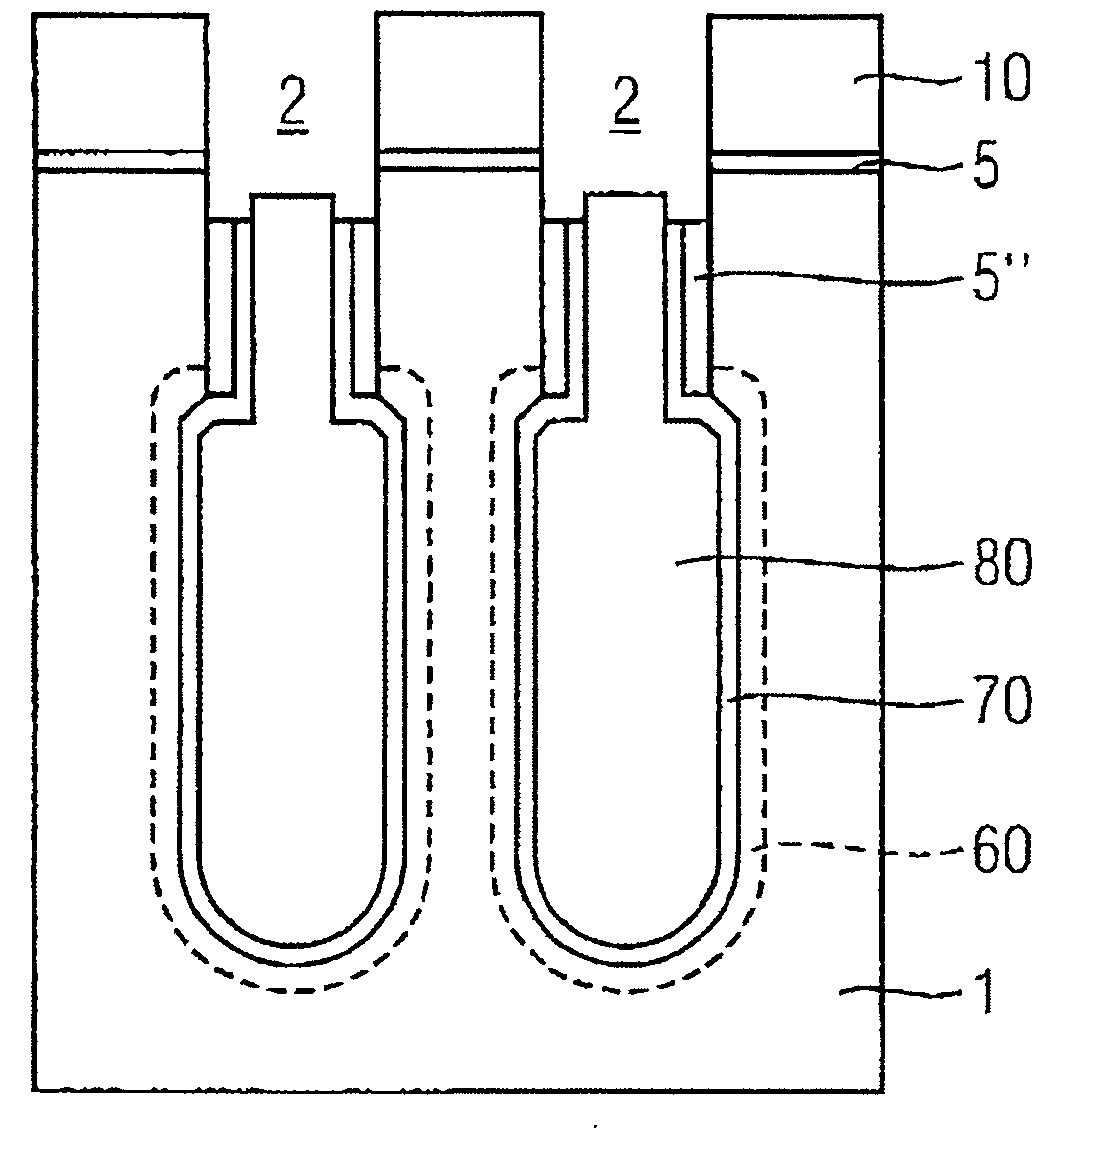 Trench capacitor with insulating collar, and appropriate method of fabrication